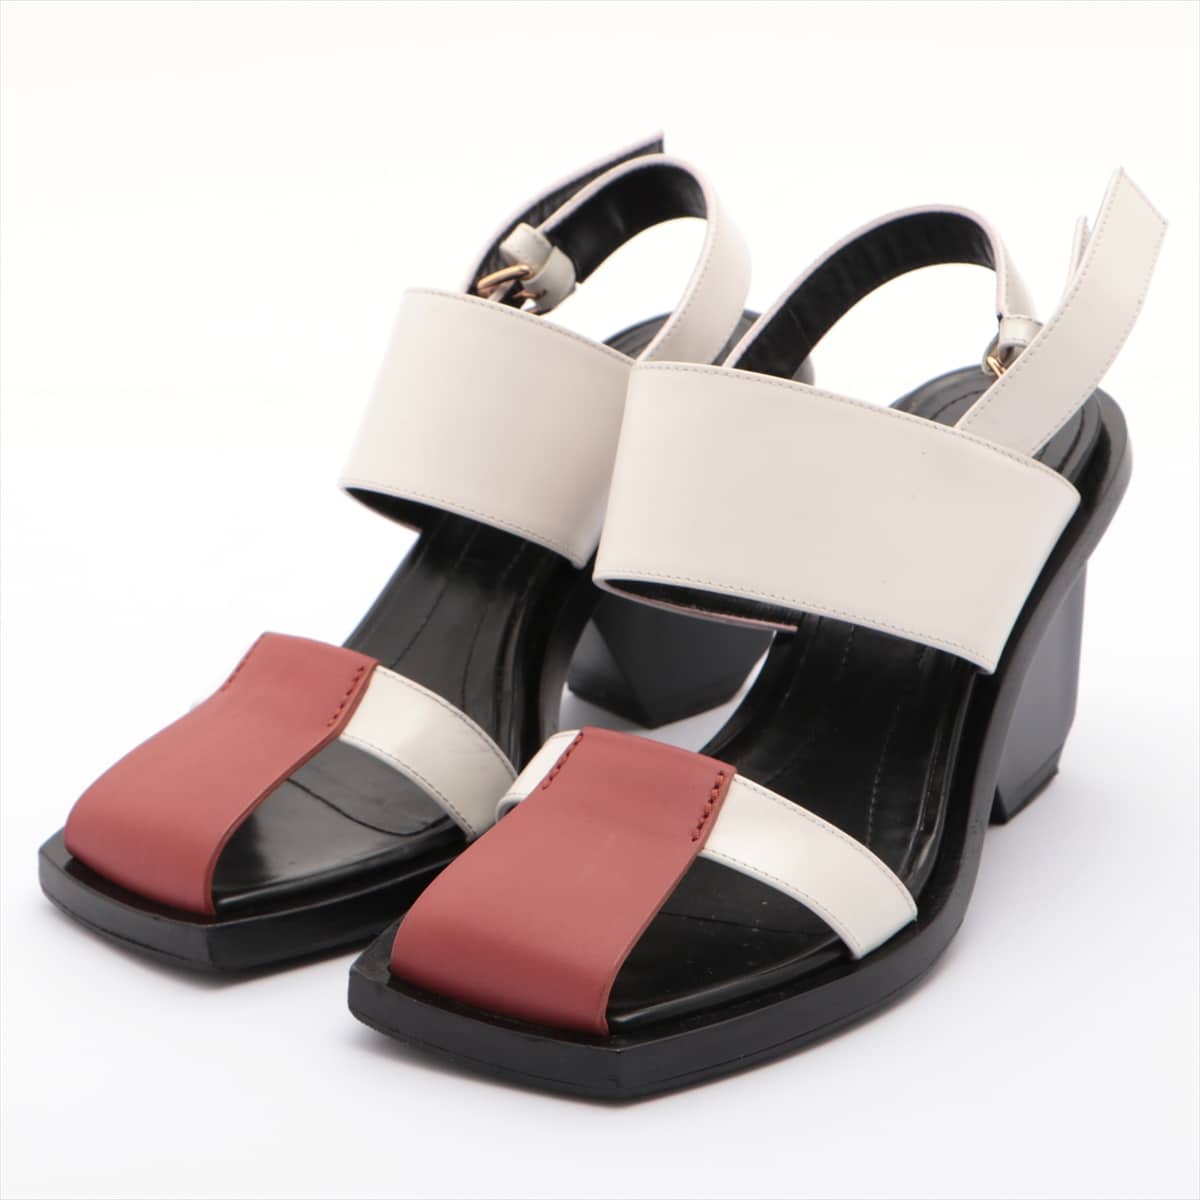 Marni Leather Sandals 35 Ladies' White Has half rubber